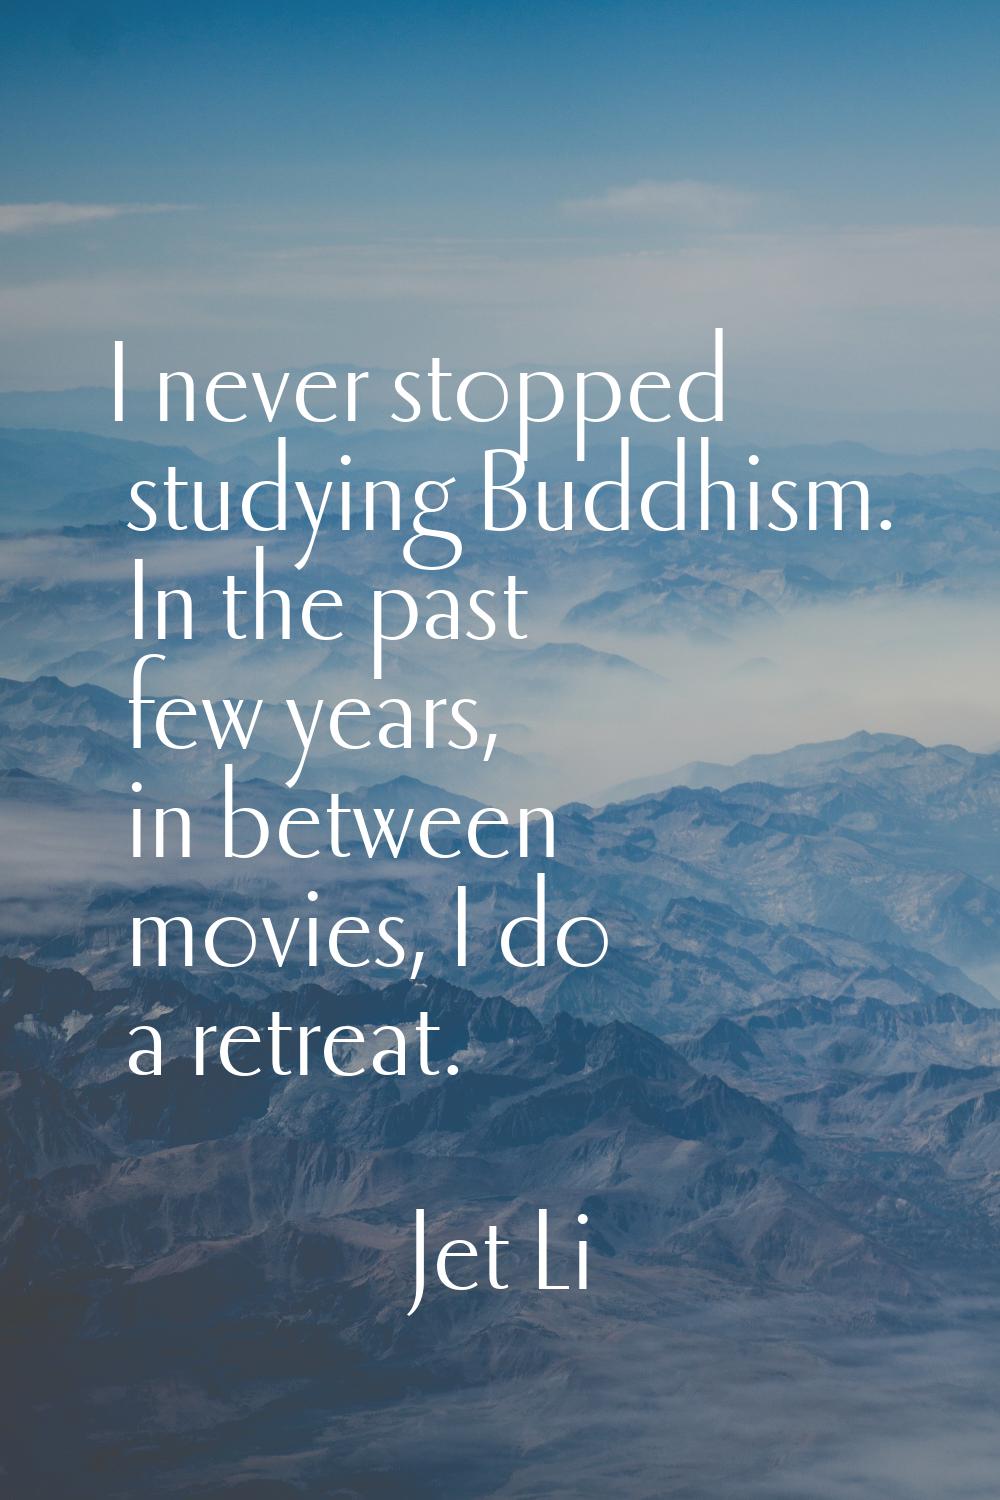 I never stopped studying Buddhism. In the past few years, in between movies, I do a retreat.